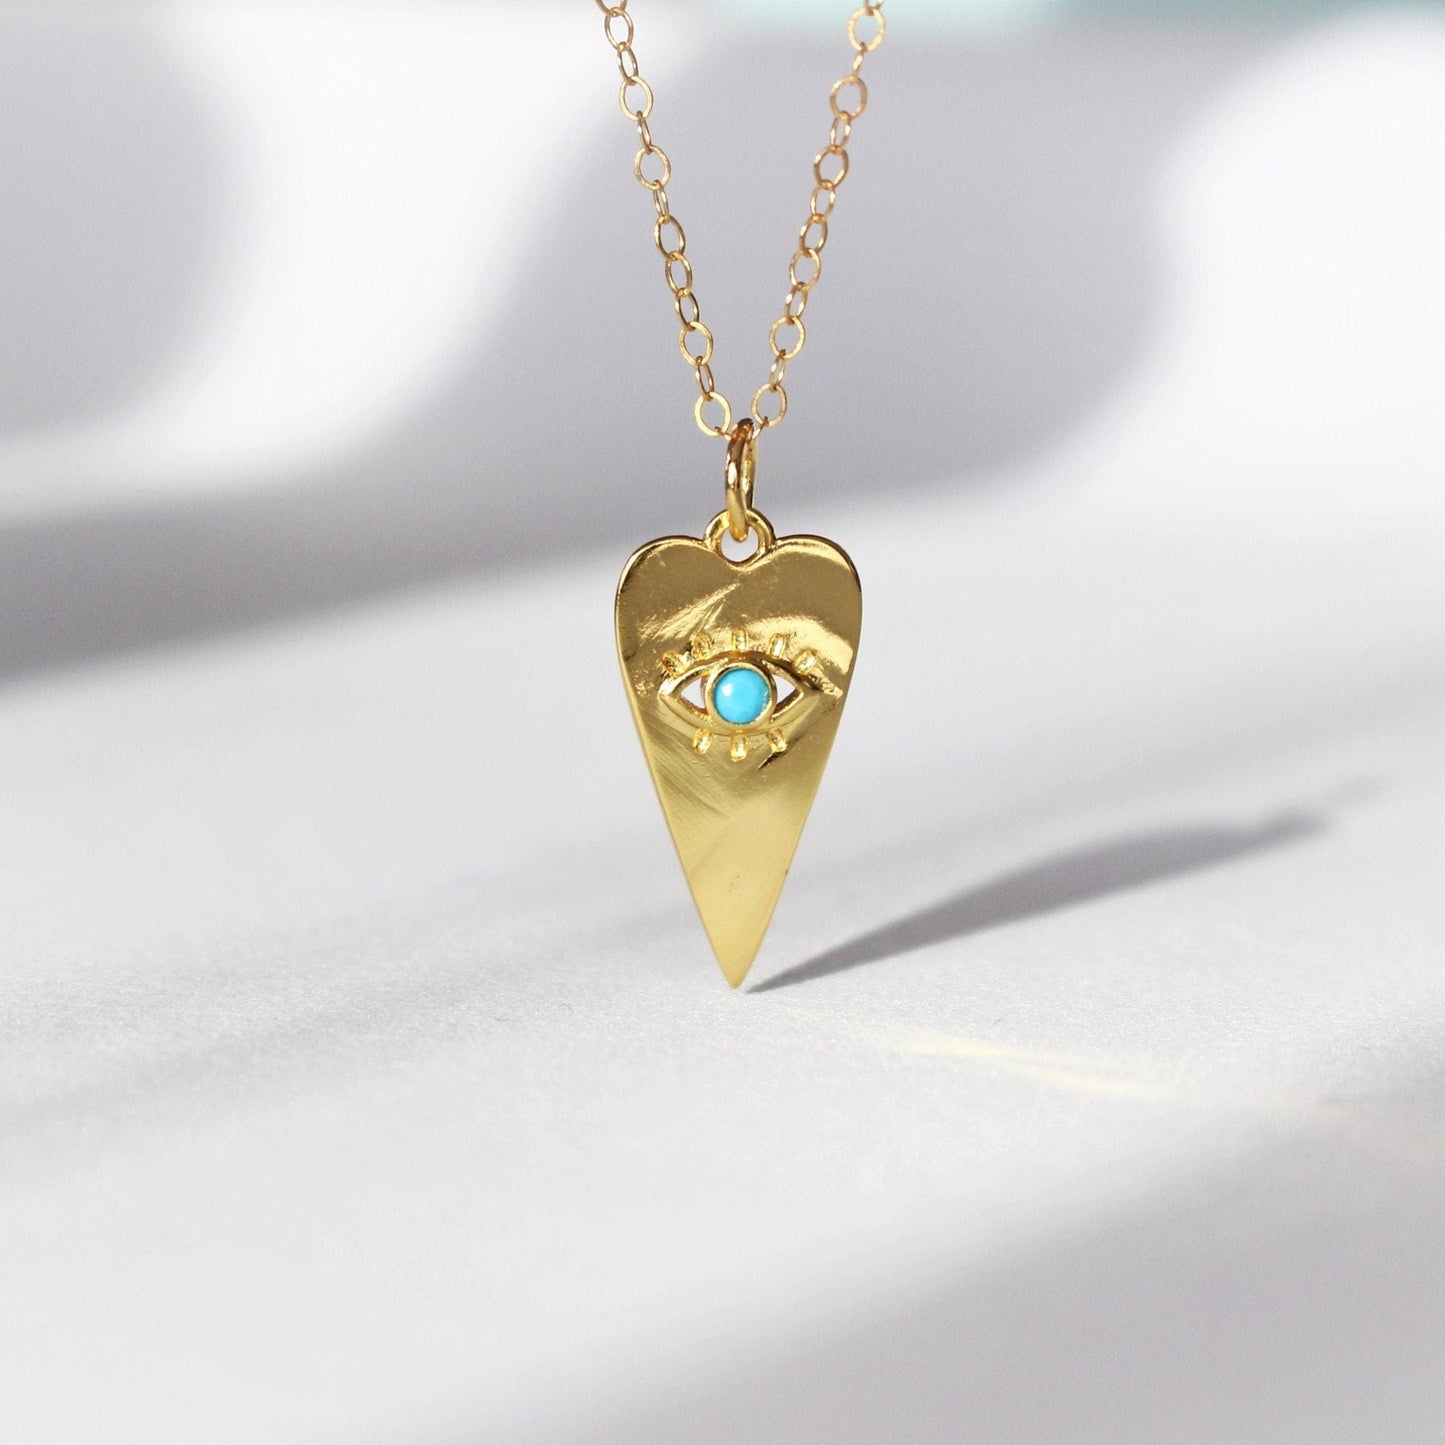 Turquoise evil eye necklace in 14K Gold Filled - Protection and Love